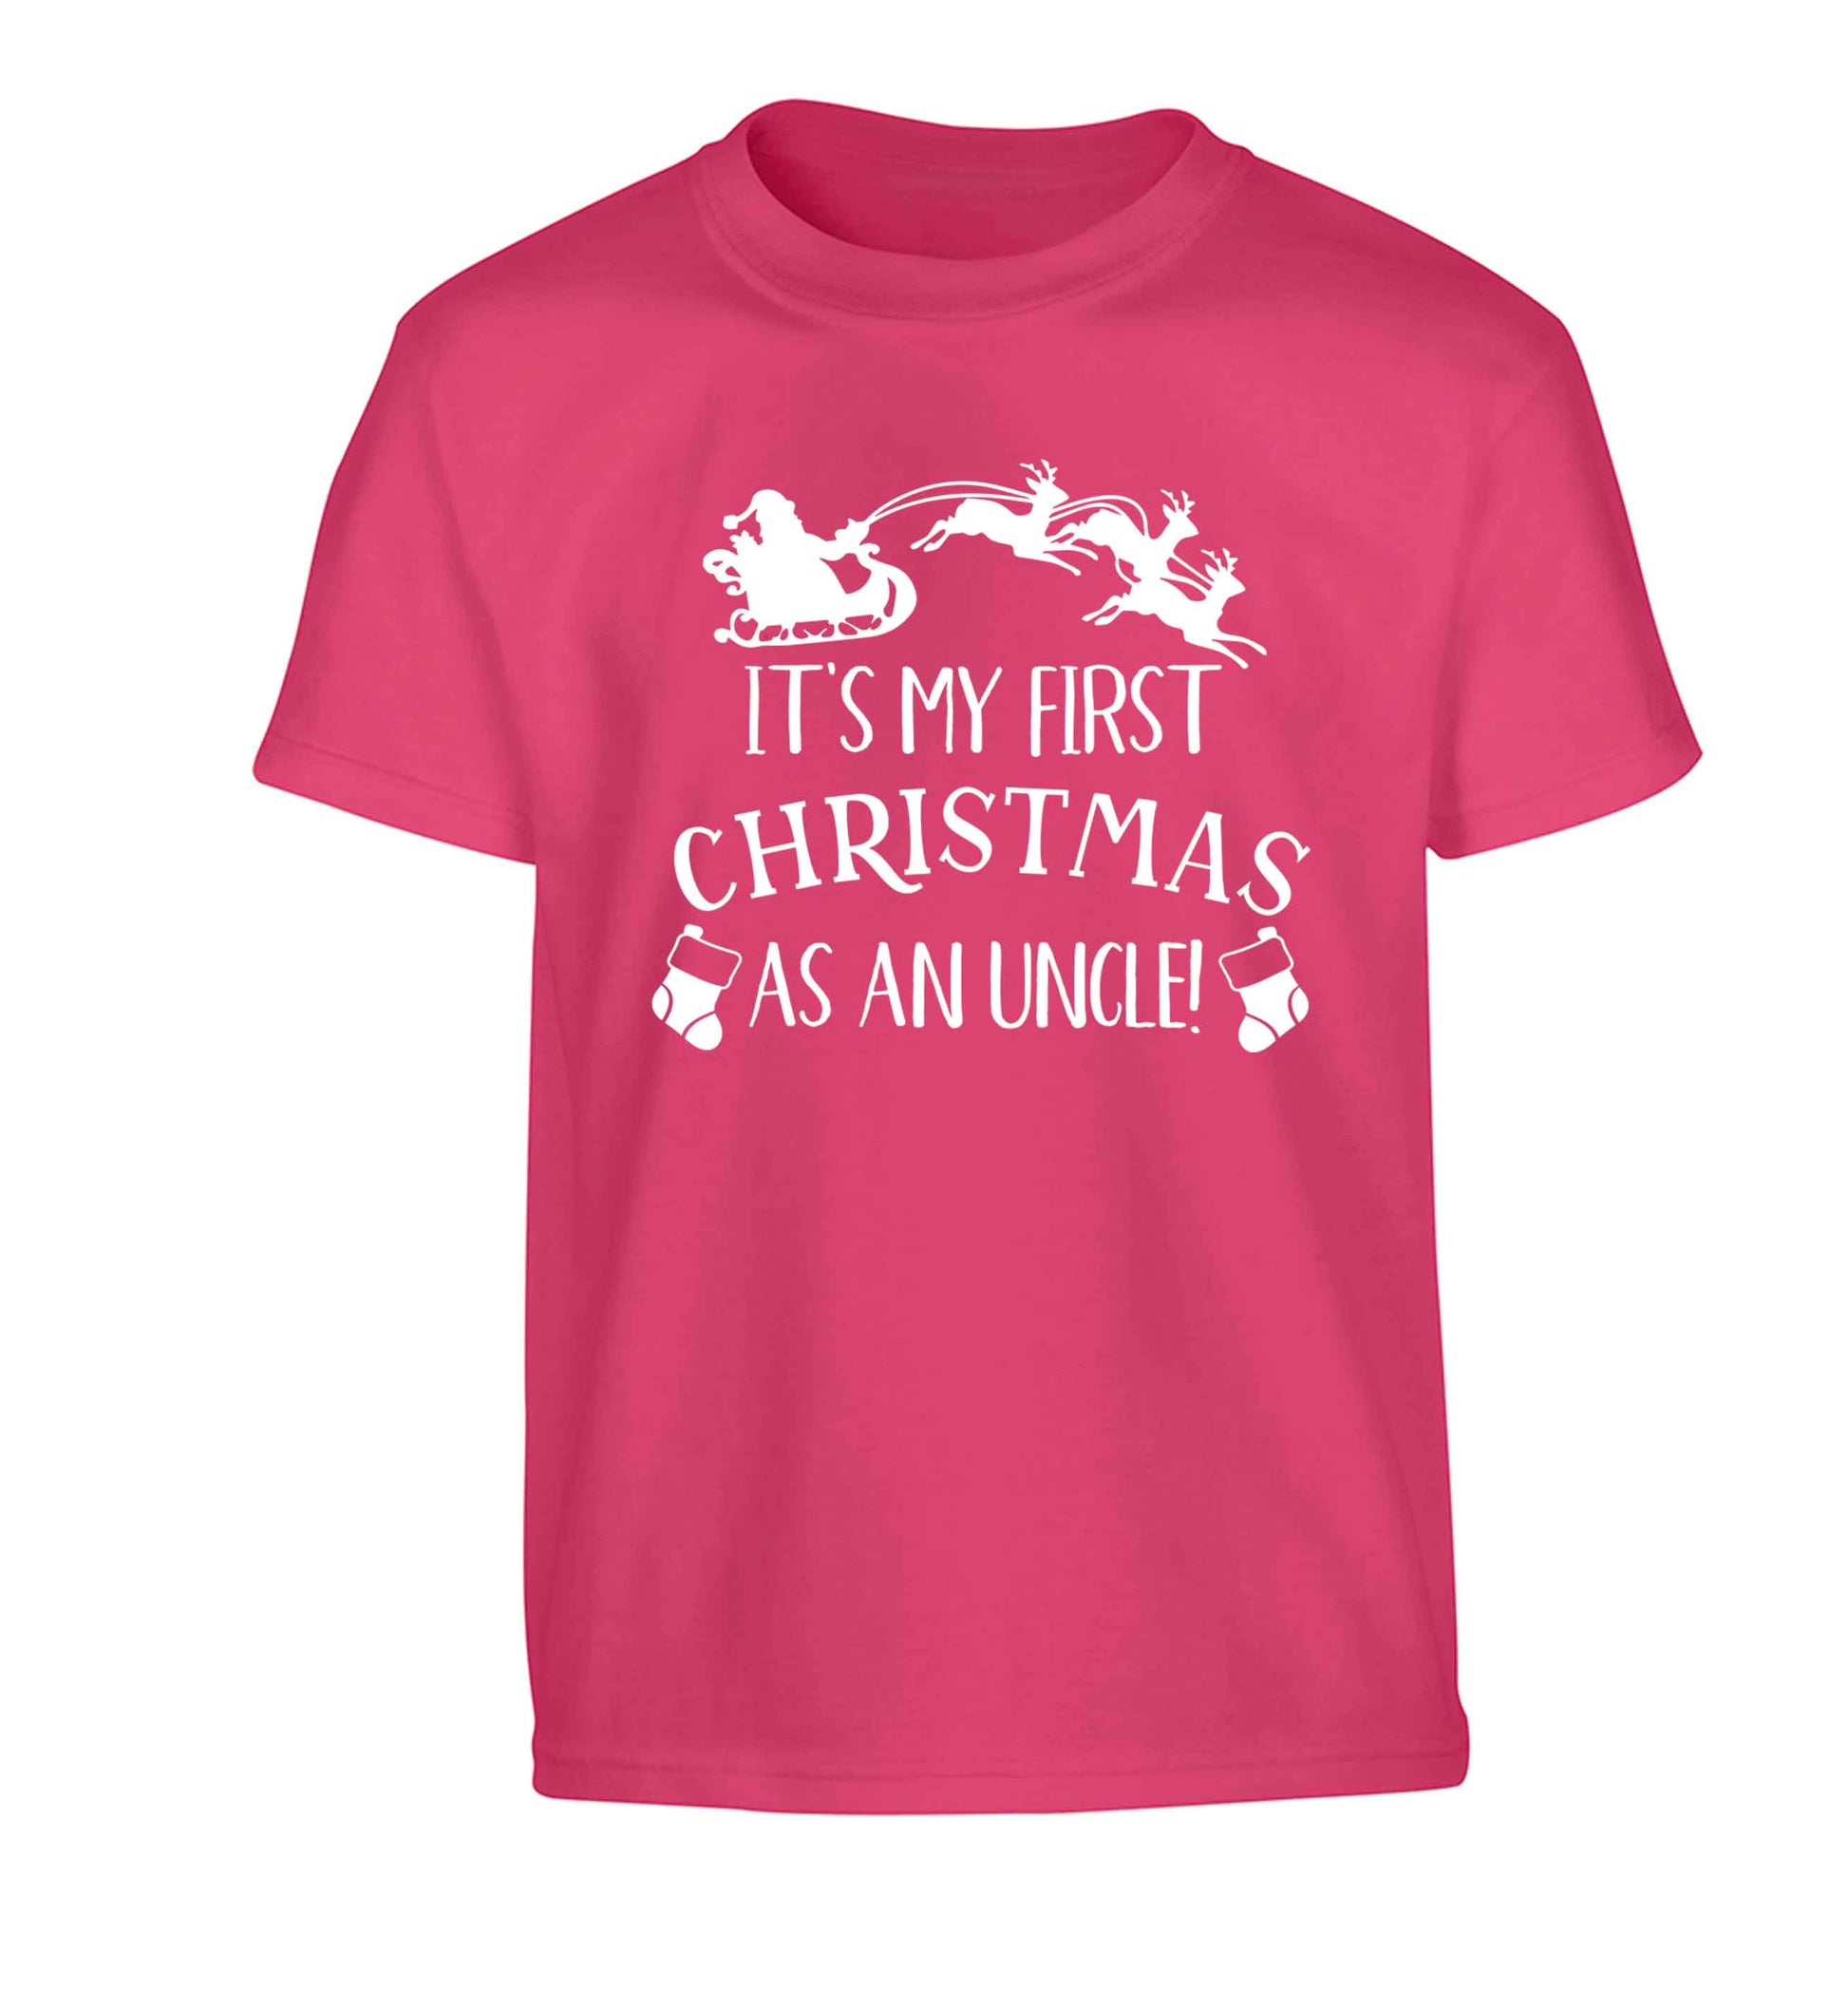 It's my first Christmas as an uncle! Children's pink Tshirt 12-13 Years